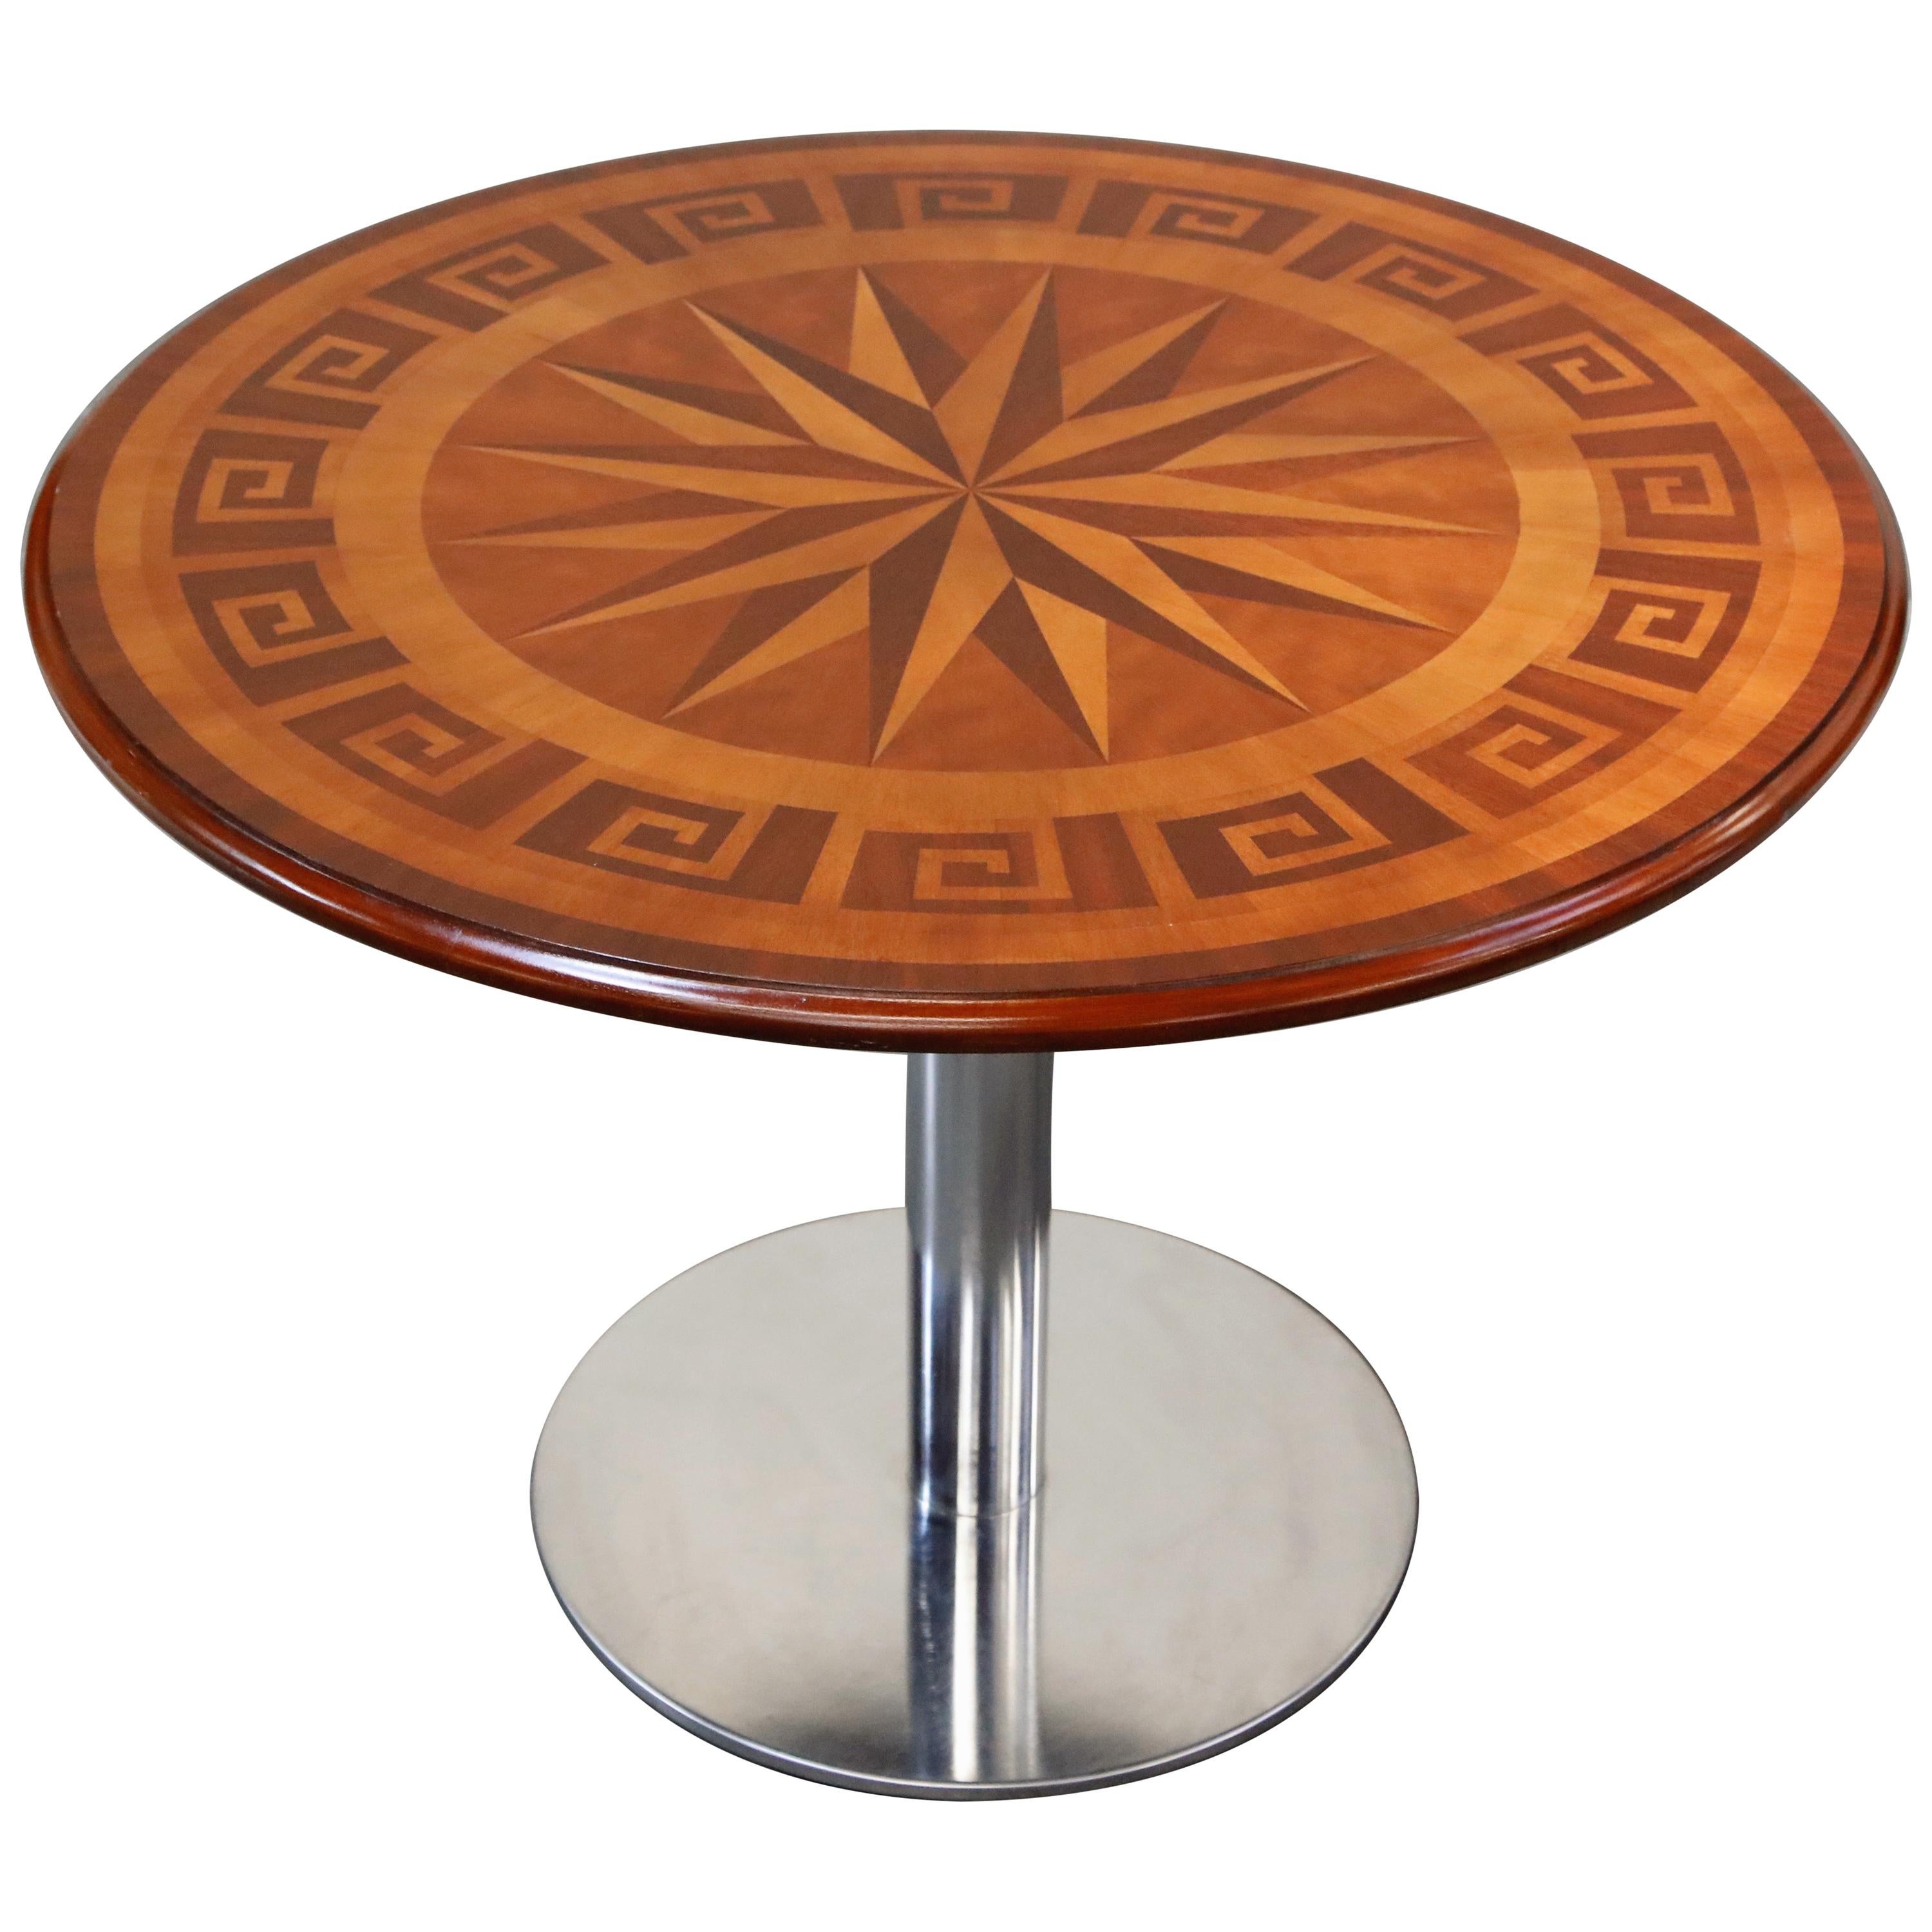 Inlaid Marquetry Dining Table on Chrome Base with Greek Key and Nautical Motifs